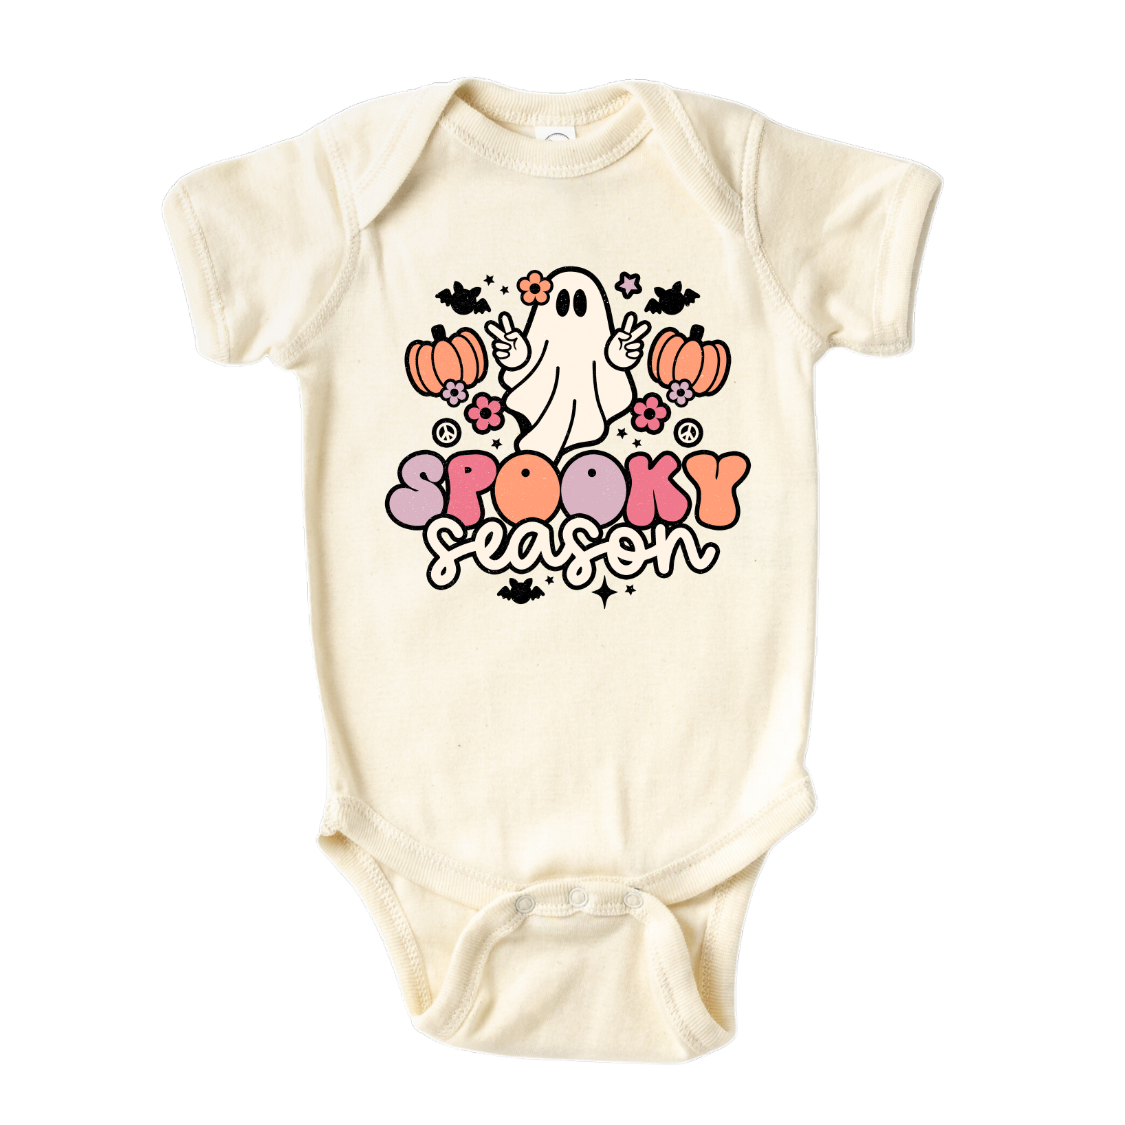 Natural onesie with a cute ghost graphic and the text 'Spooky Season.' Perfect for Halloween outfits and festivities. Shop now and let your little one embrace the spirit of Halloween with this fun and festive tee!